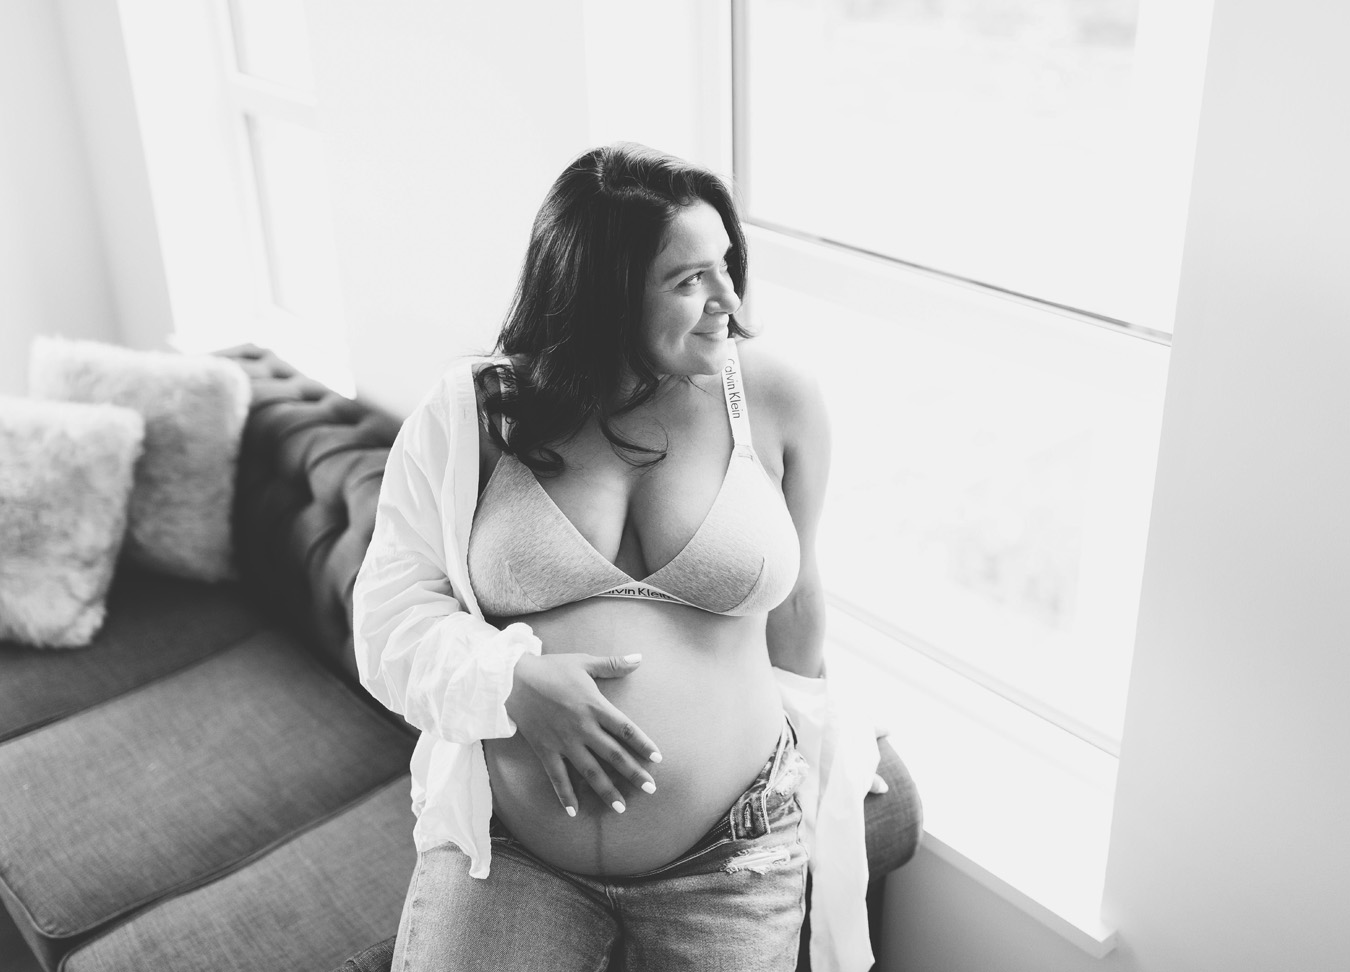 one of the best date night ideas in D.C. is maternity photography by Stephanie Honikel. This picture shows a black and white photo of a pregnant woman.